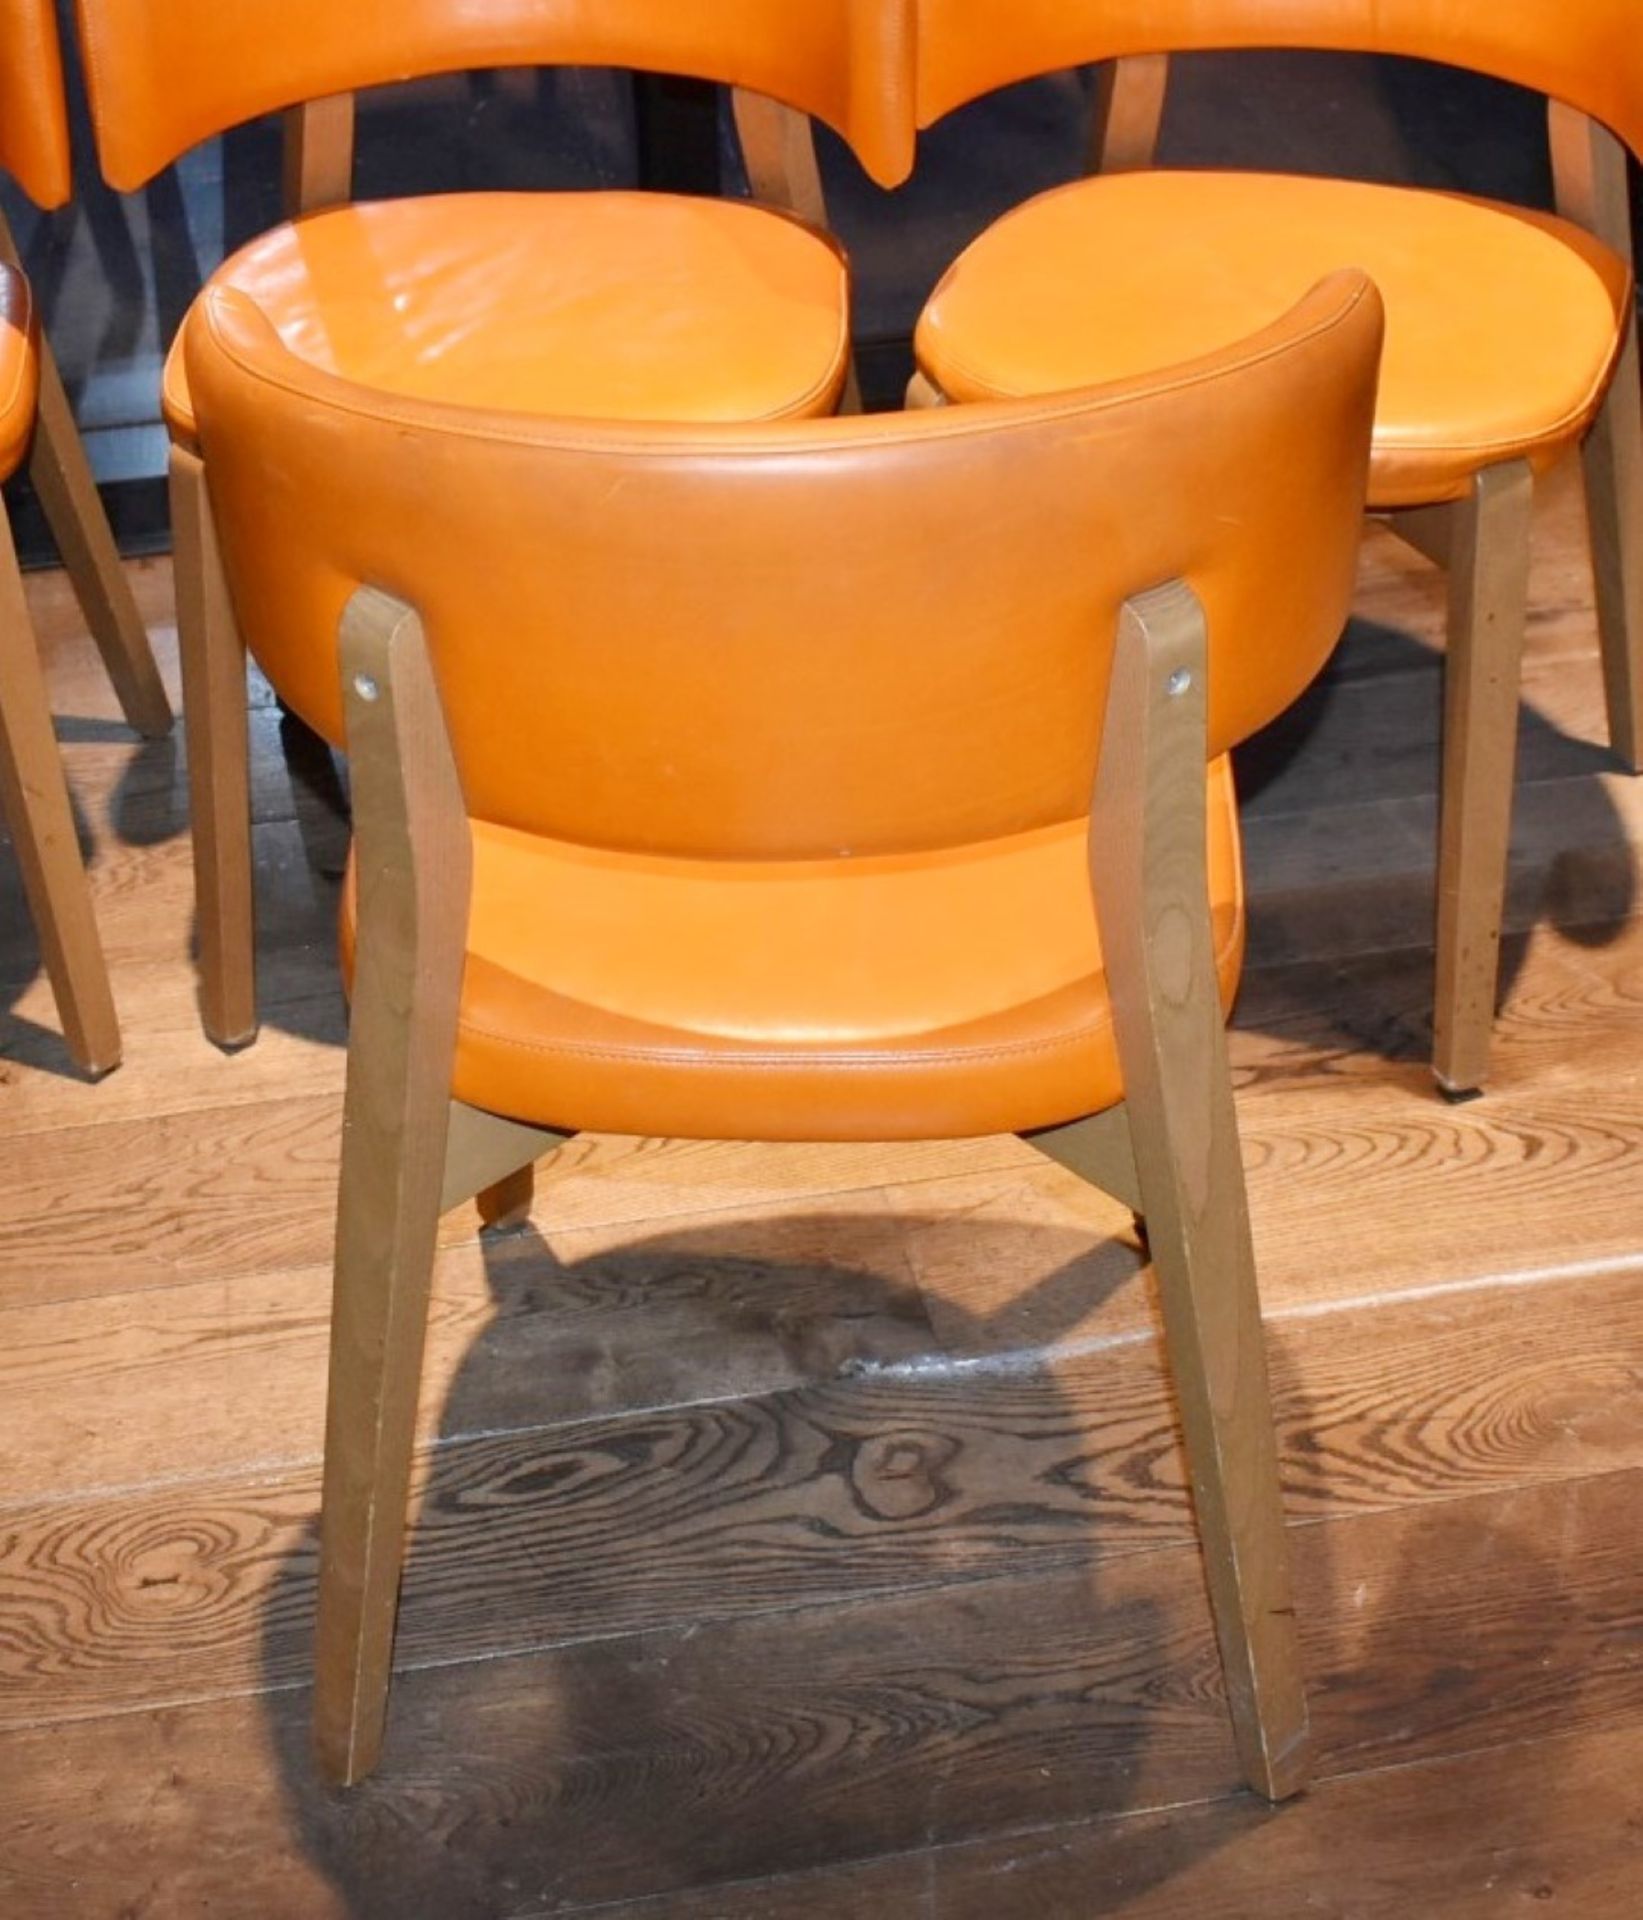 4 x Contemporary Dining Chairs With Beech Frames and Orange Leather Seat Pads and Back Rests - Image 4 of 4